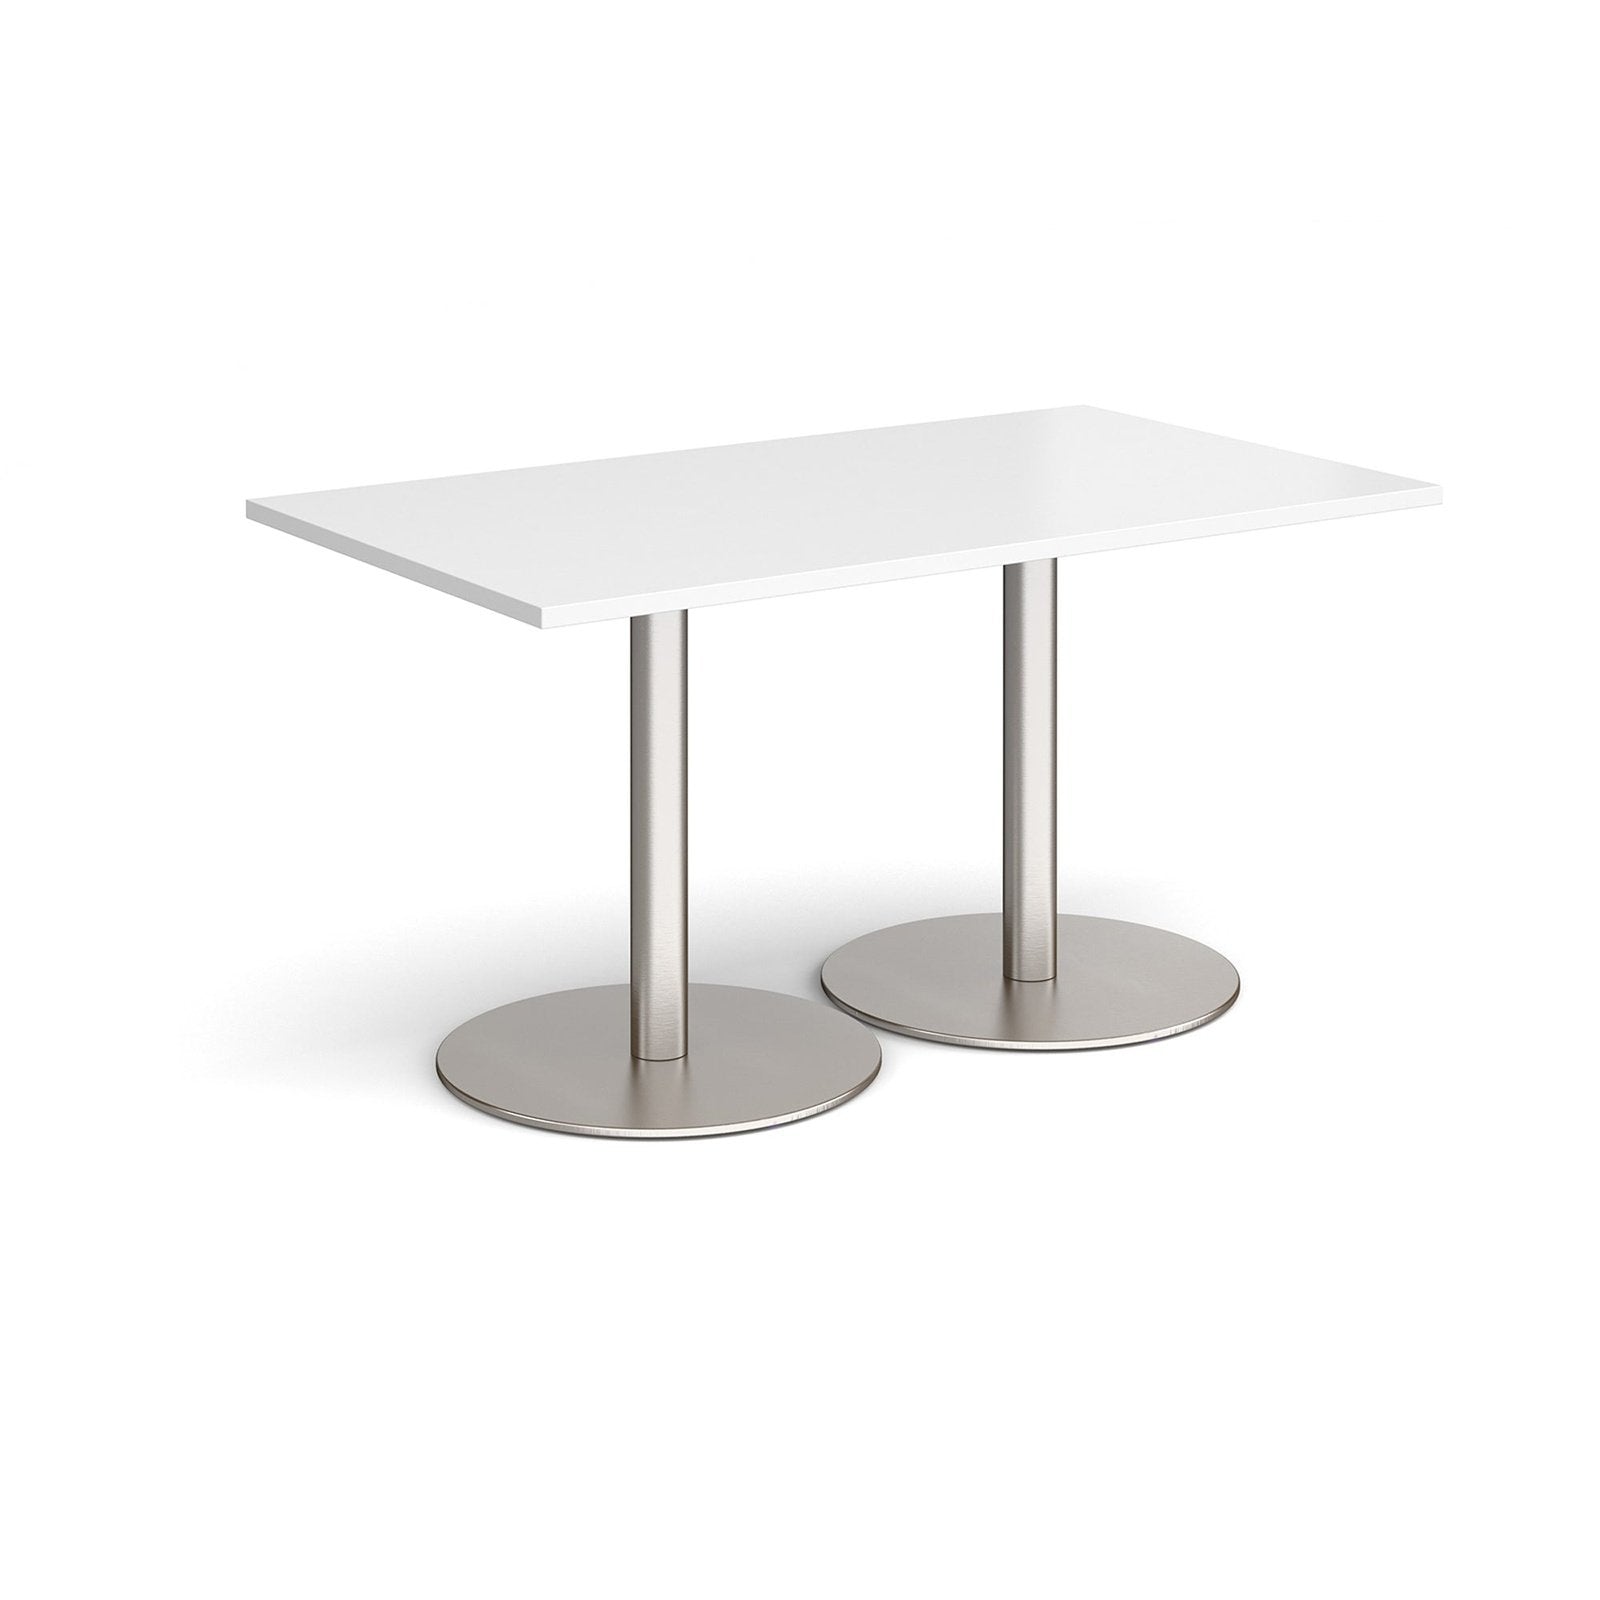 Monza rectangular dining table with flat bases - Office Products Online